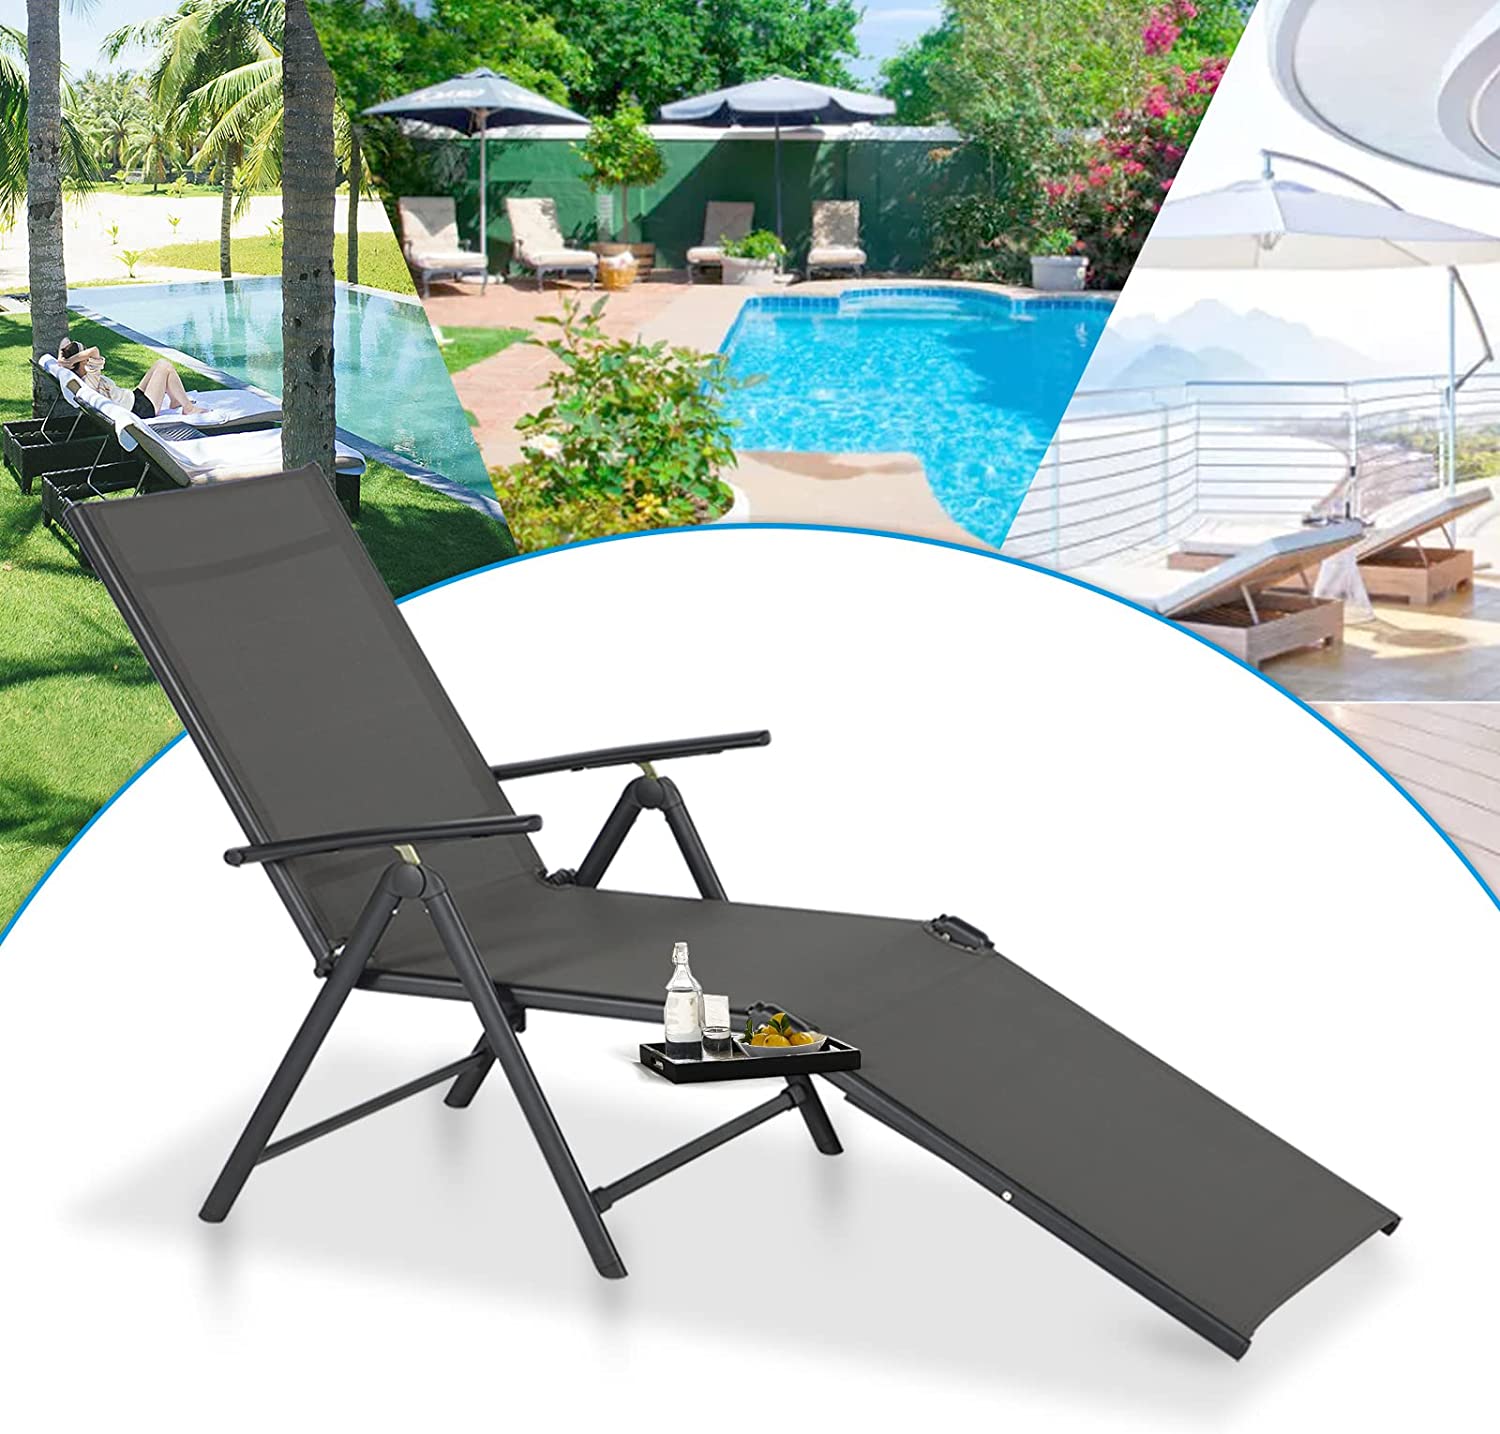 AECOJOY Outdoor Chaise Lounge Chair, Adjustable Textile Reclining Folding Pool Lounge, Gray - image 4 of 7